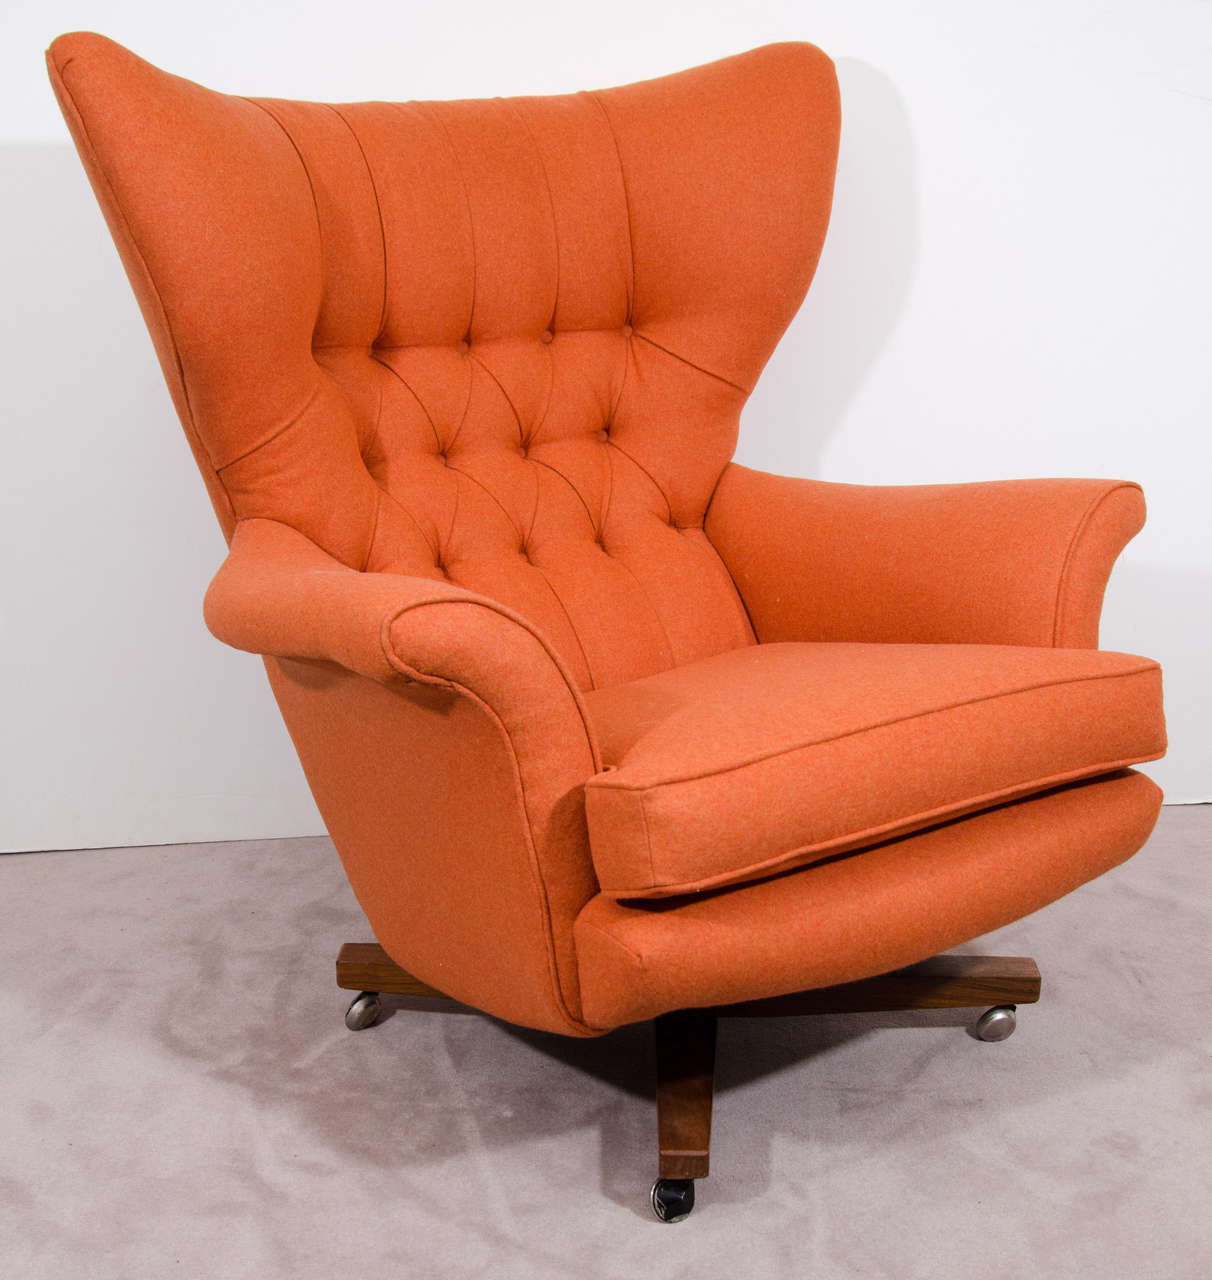 A vintage high back 6250 lounge chair by Paul Conti for G-Plan. The piece has button tufted cushions recently reupholstered in orange Italian wool and a rosewood swivel base with casters.

Reduced from:  $3800